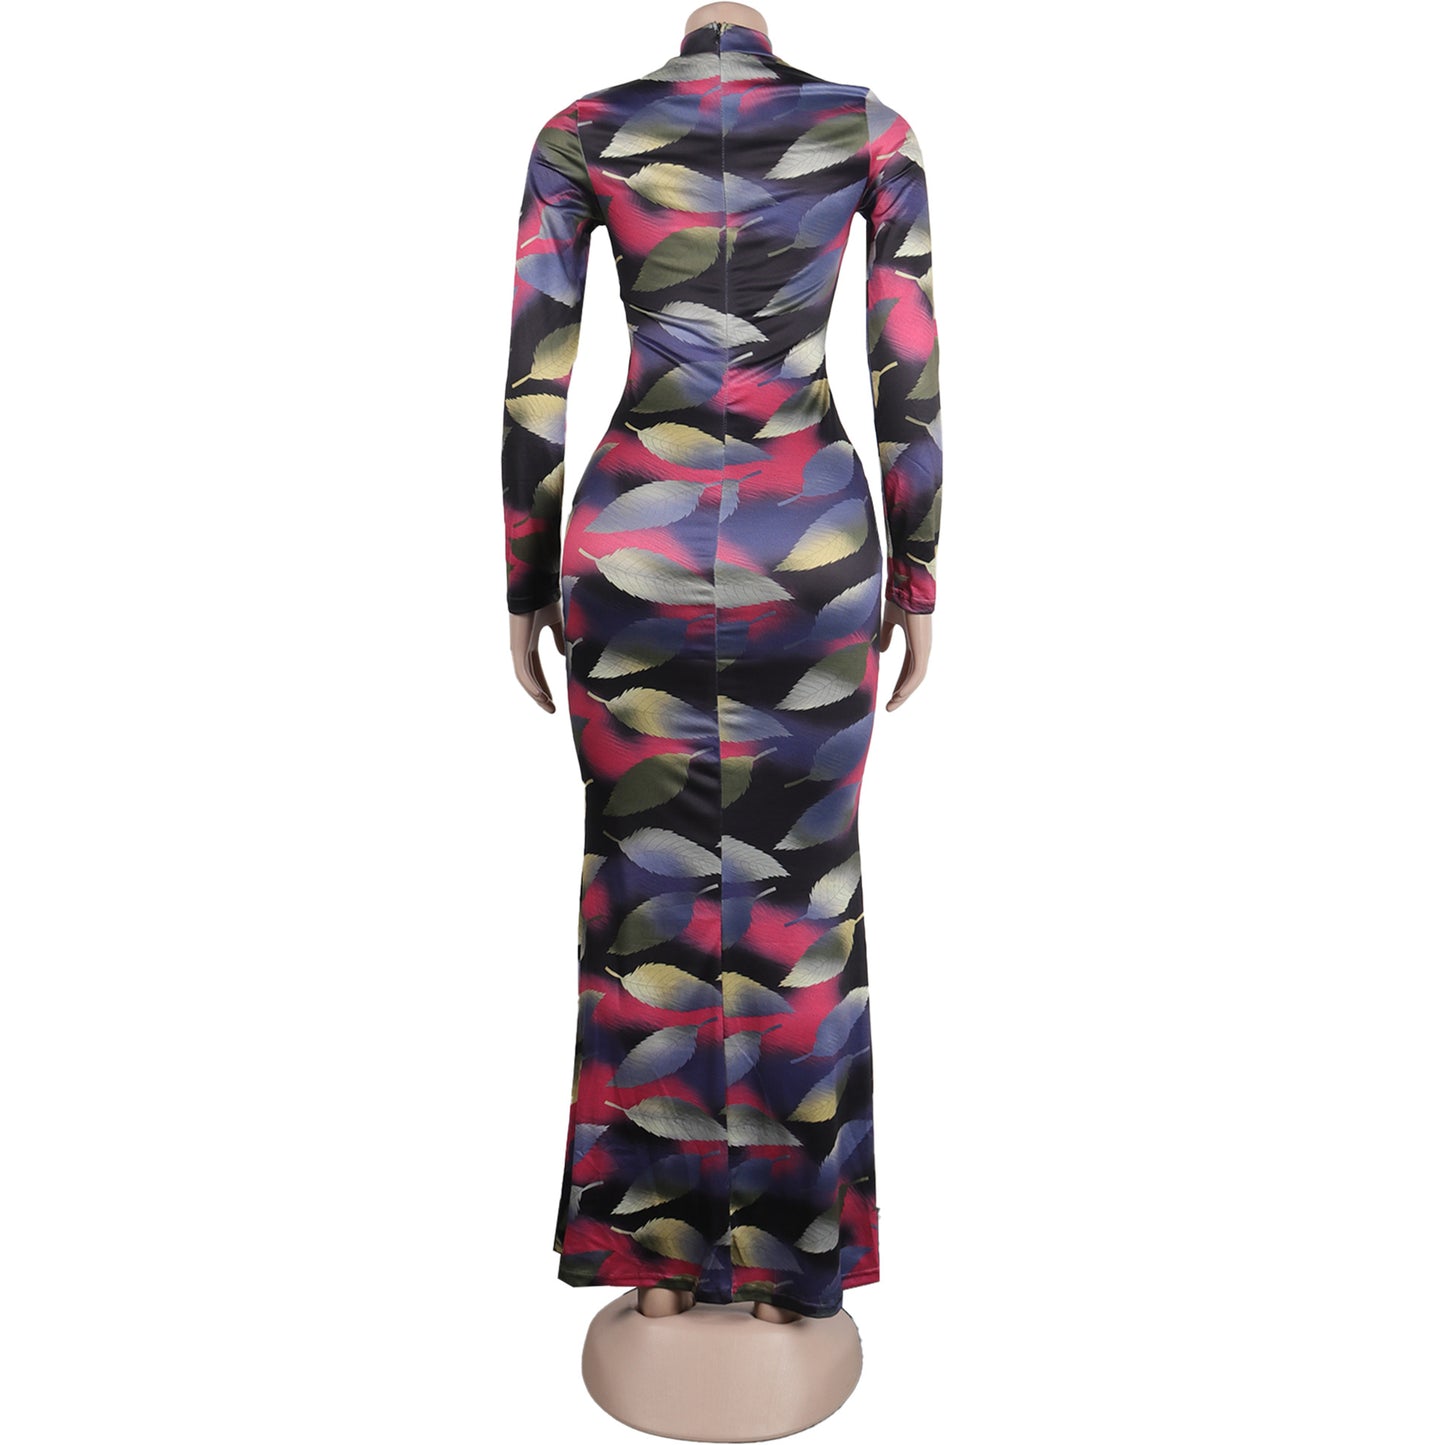 BamBam Sexy Printed Stretch Round Neck Long Sleeve Bodycon Tight Fitting Mermaid Long Dress - BamBam